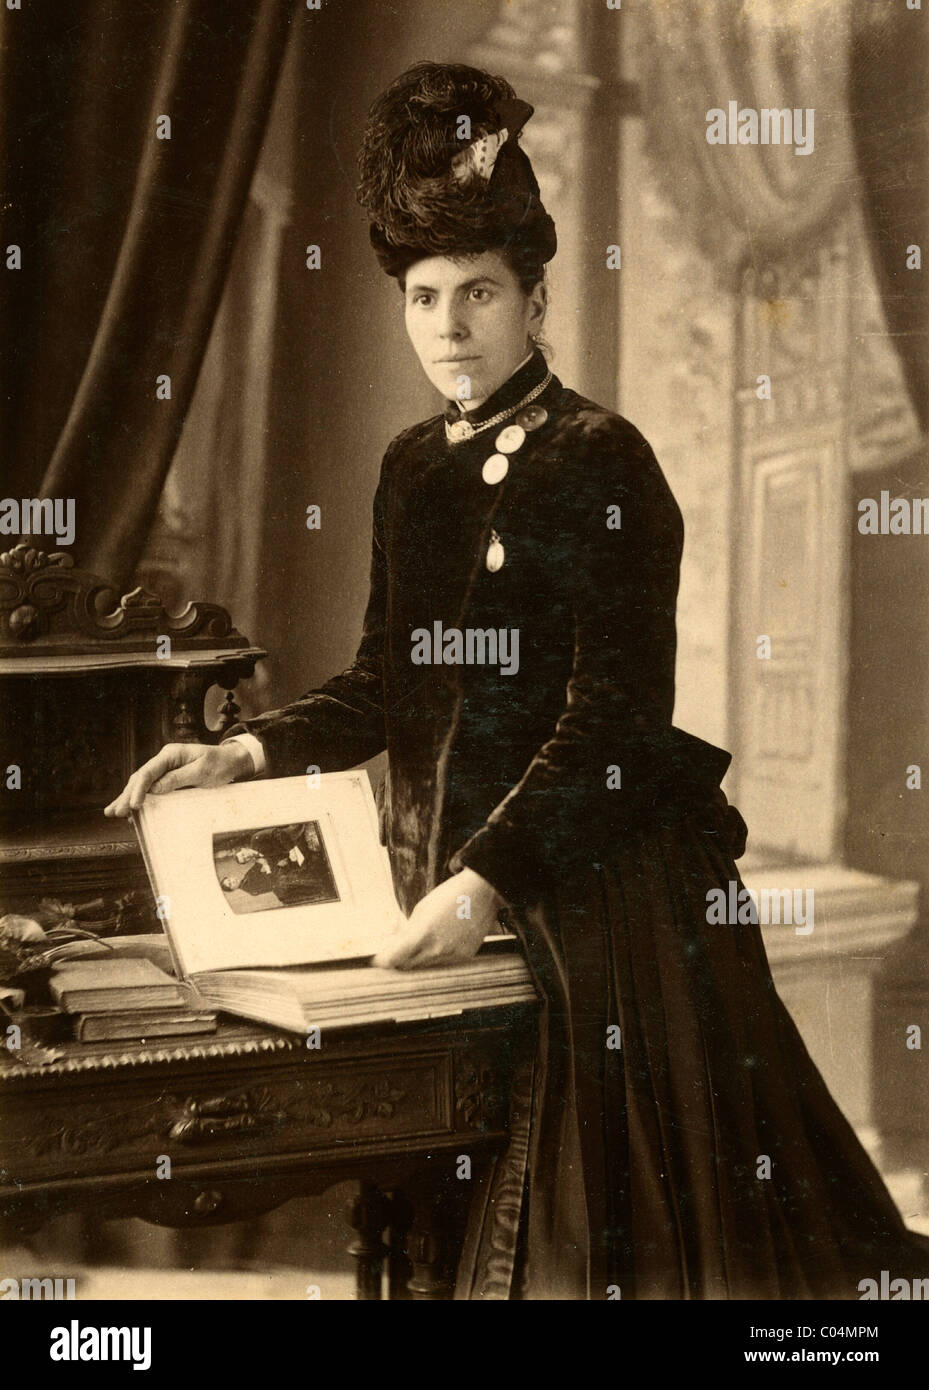 Victorian Woman Looking Through a Photograph Album of Family Photographs c1880. Vintage Cabinet Card Stock Photo